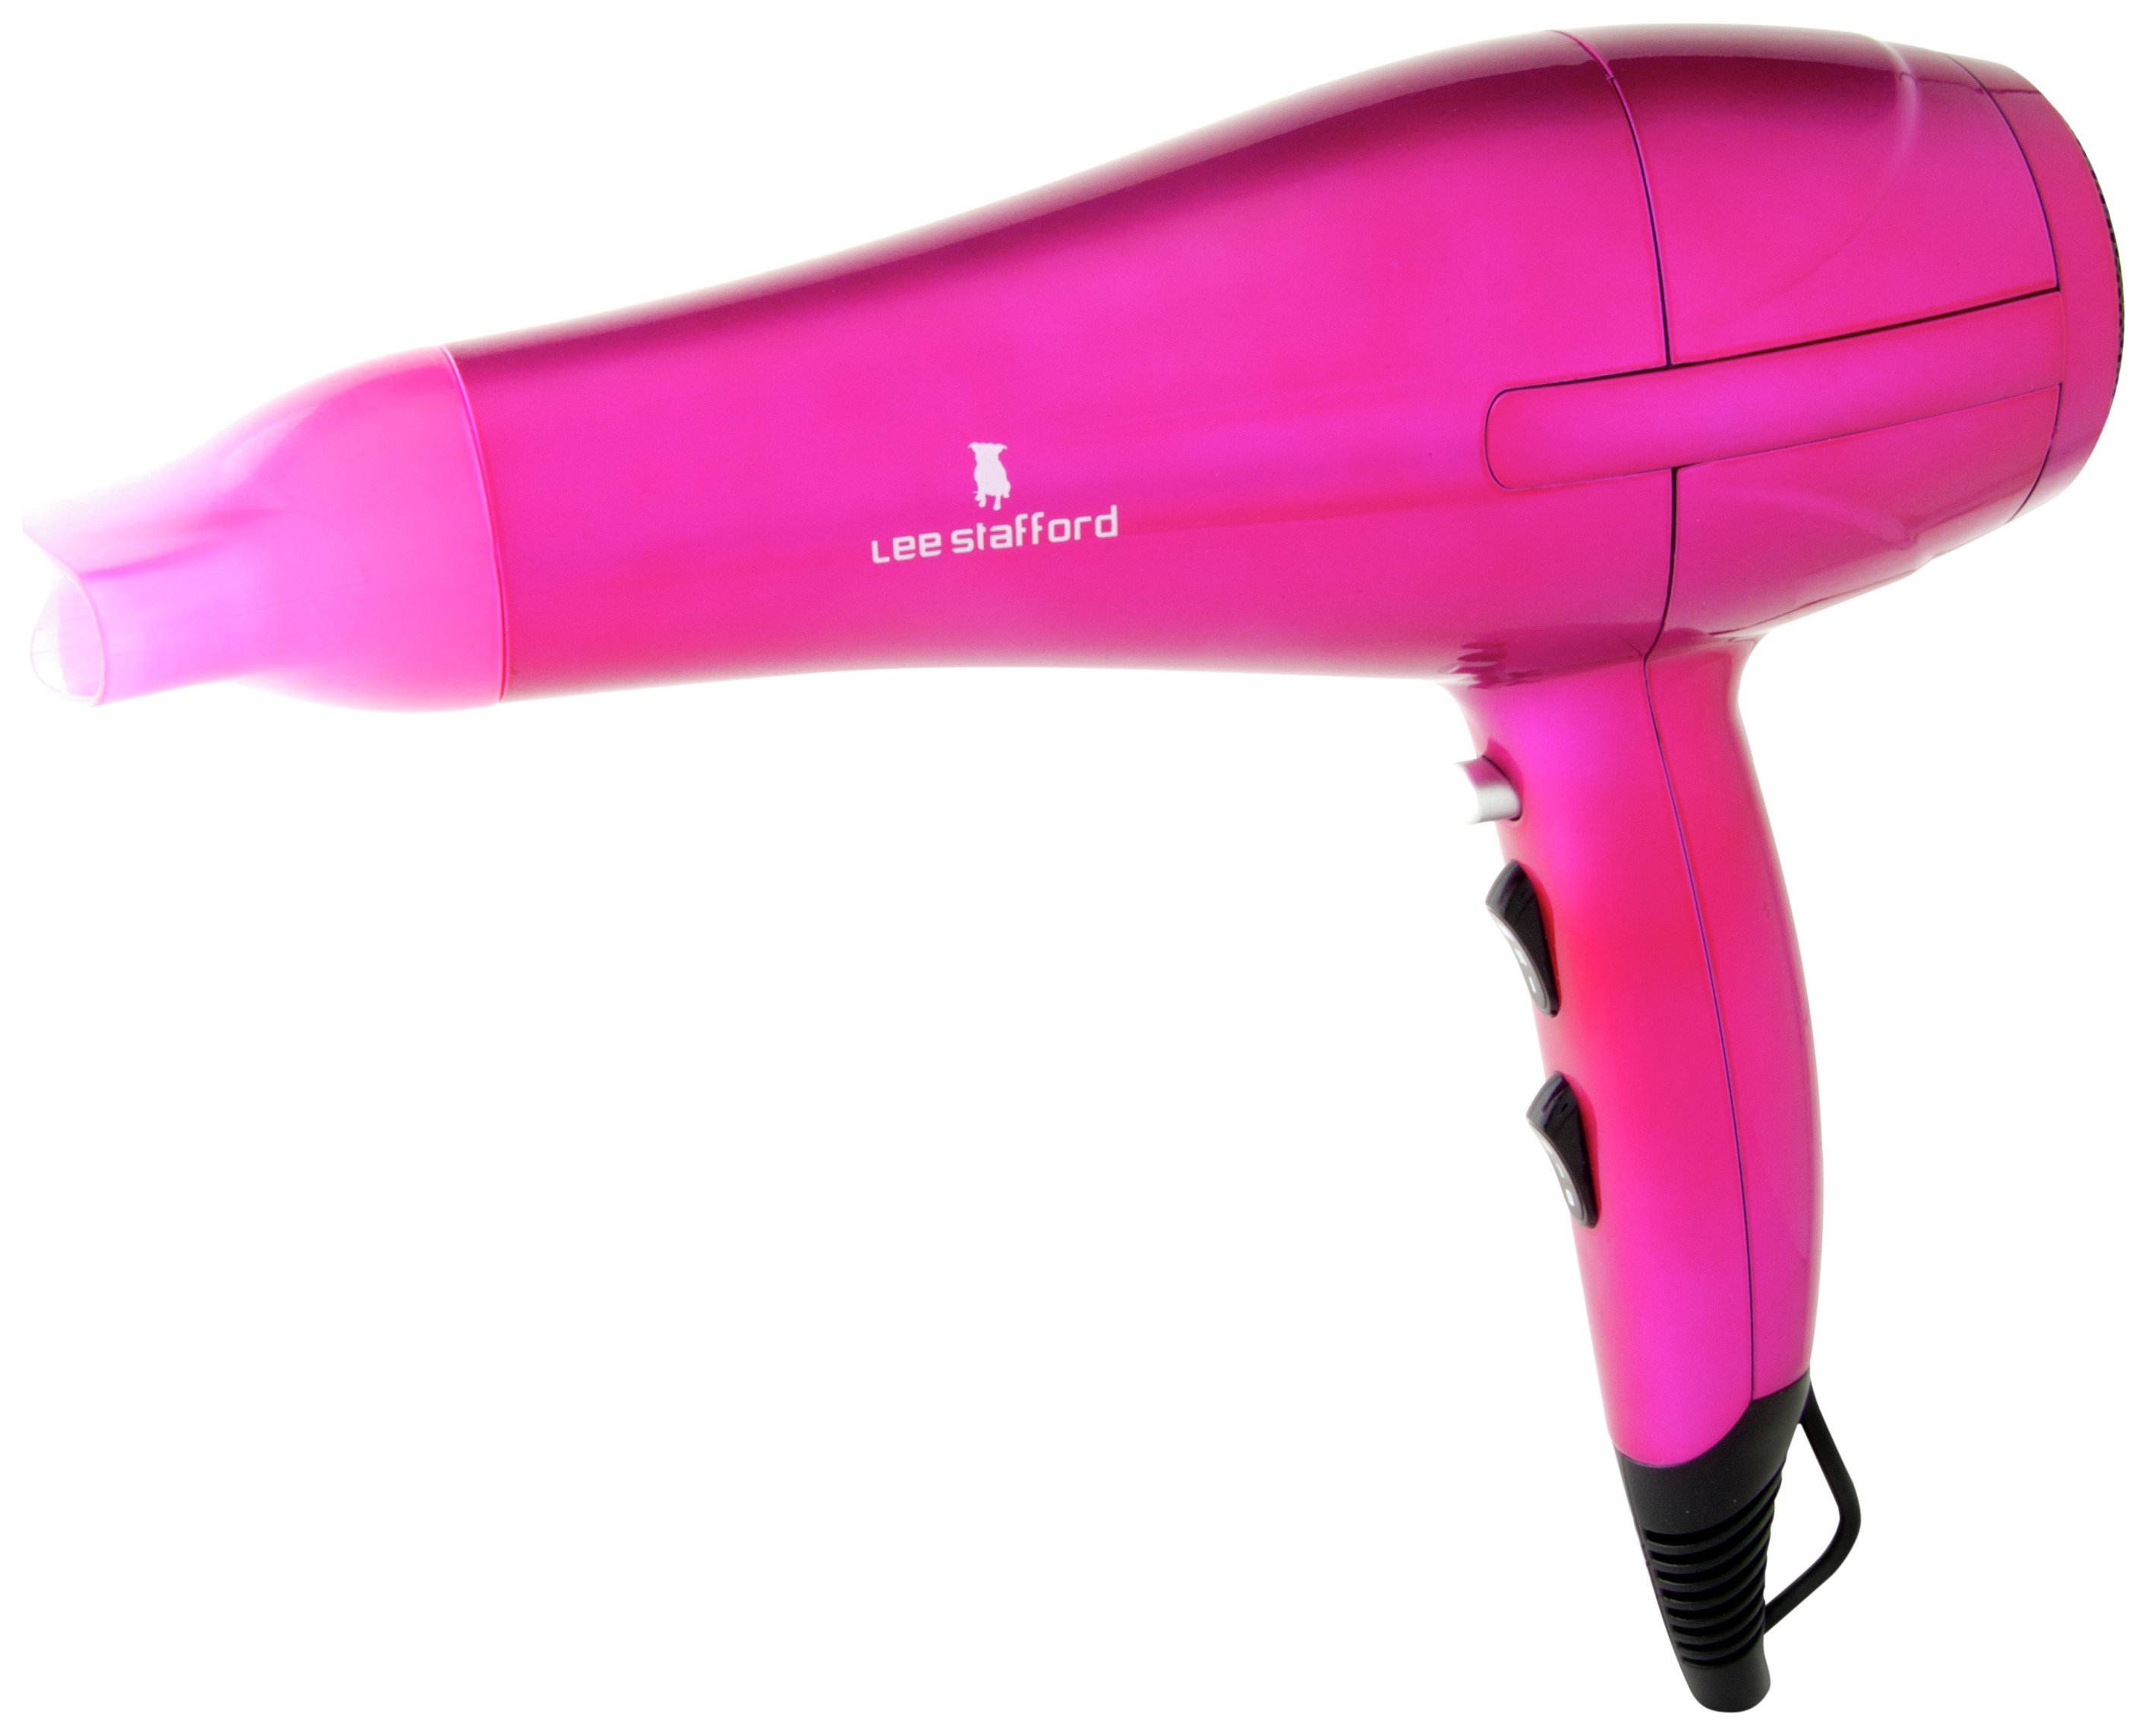 Lee Stafford Blow Your Mind Hair Dryer